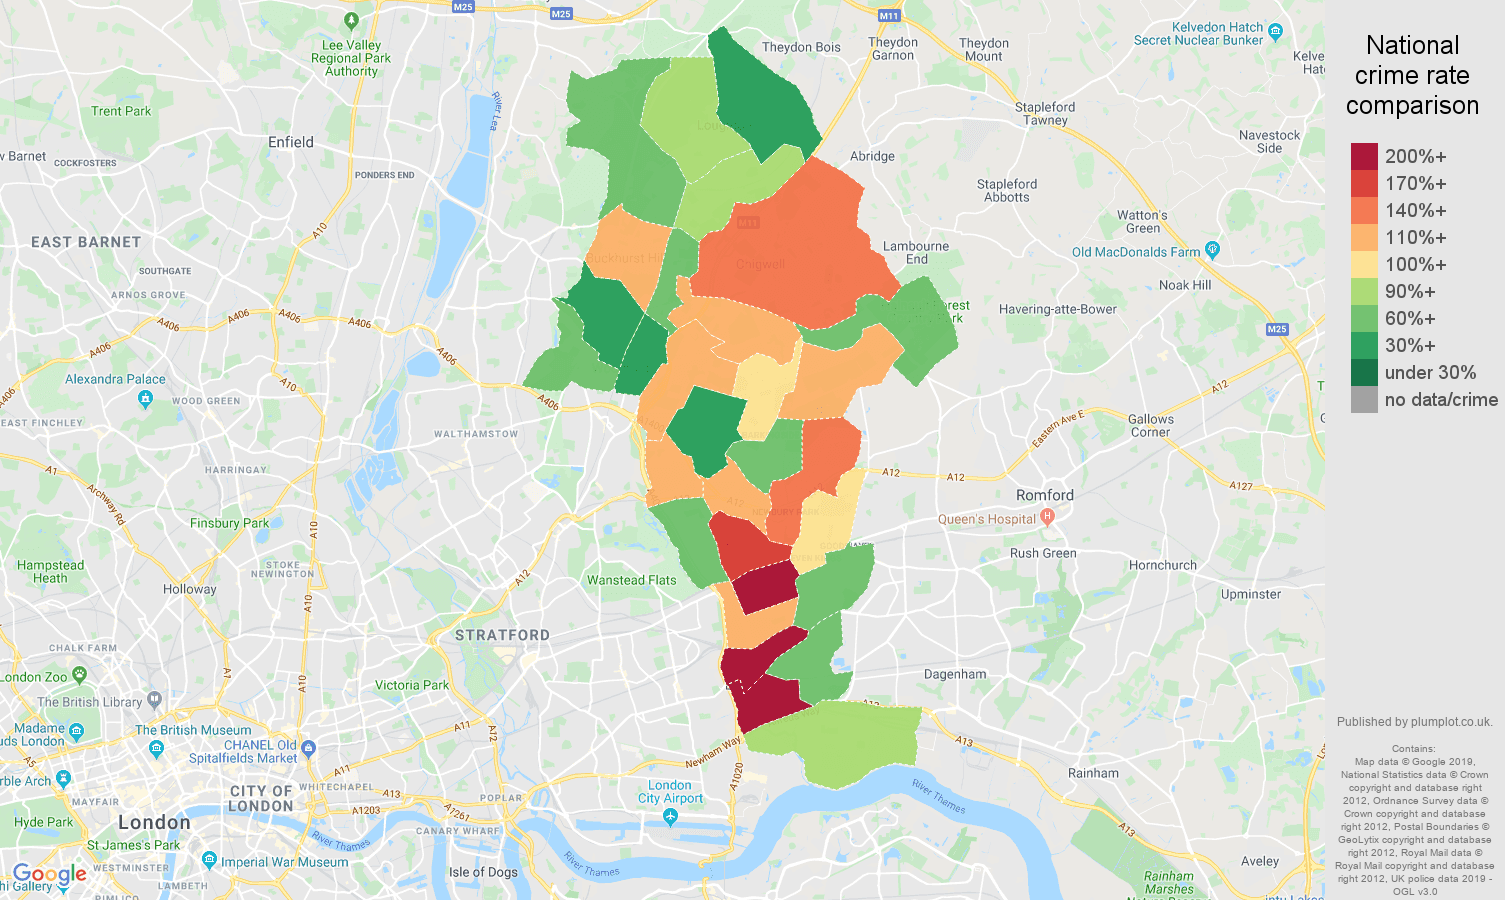 Ilford other theft crime rate comparison map